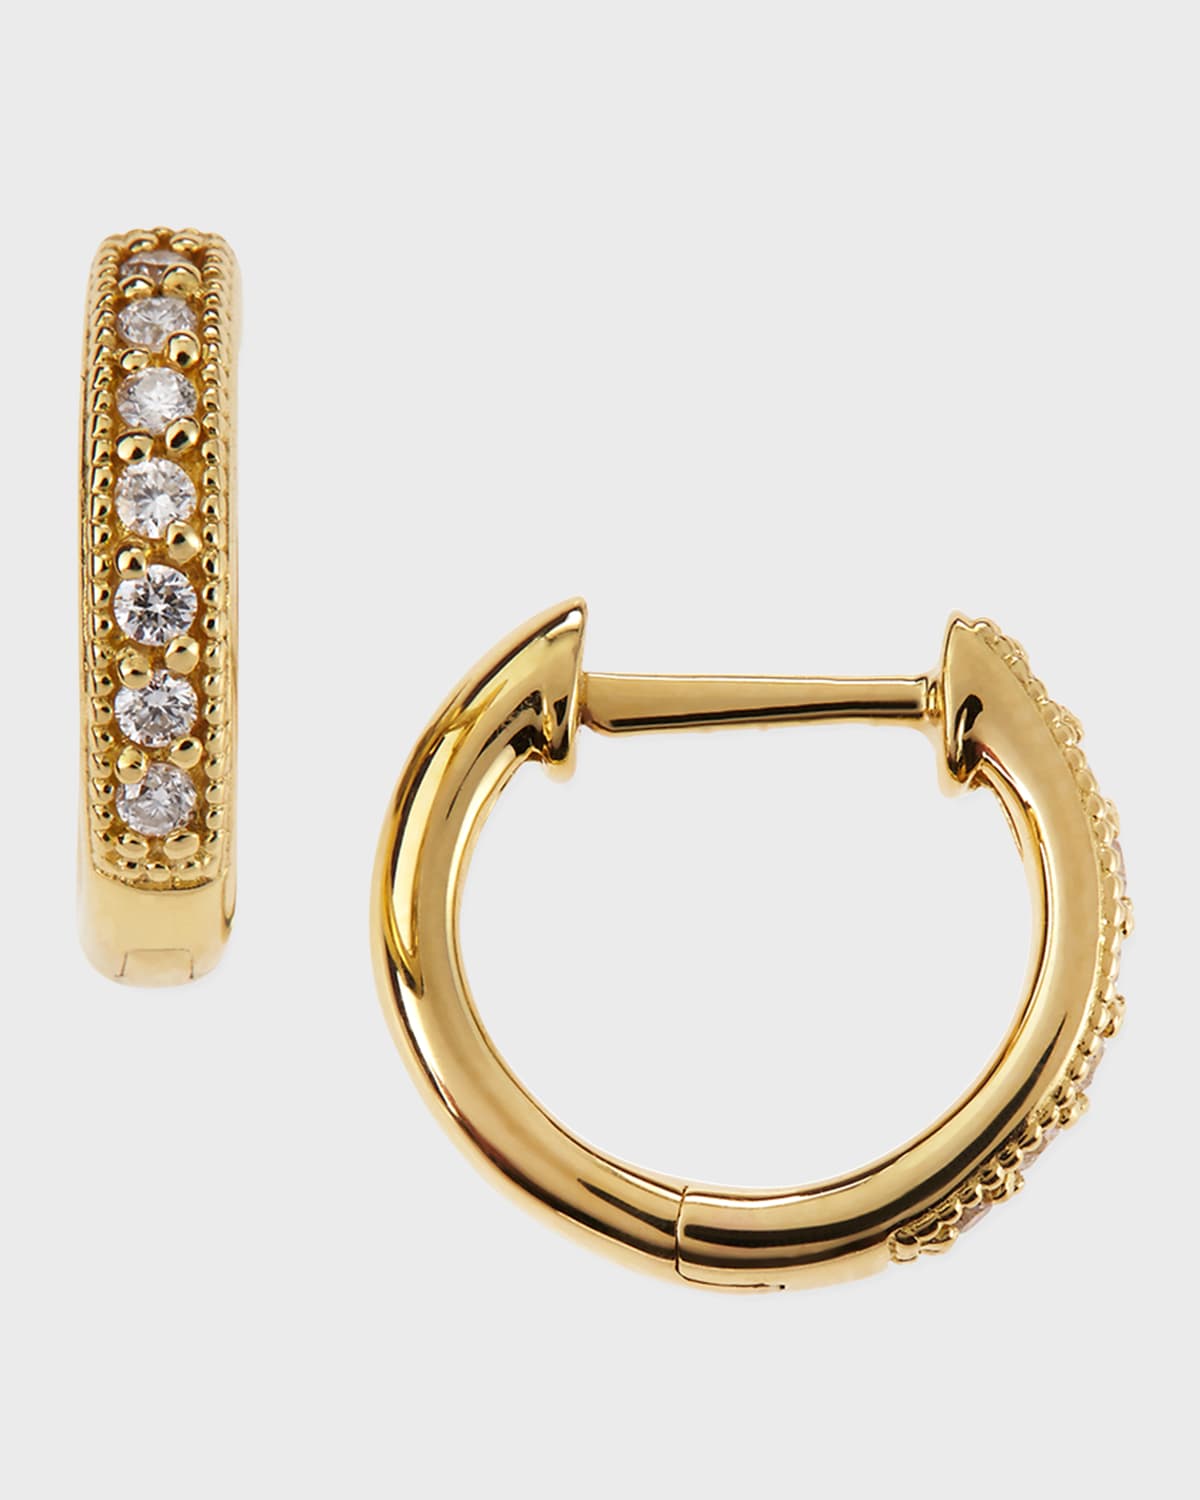 Jude Frances Small 18K Gold Hoop Earrings with Diamonds, 11mm